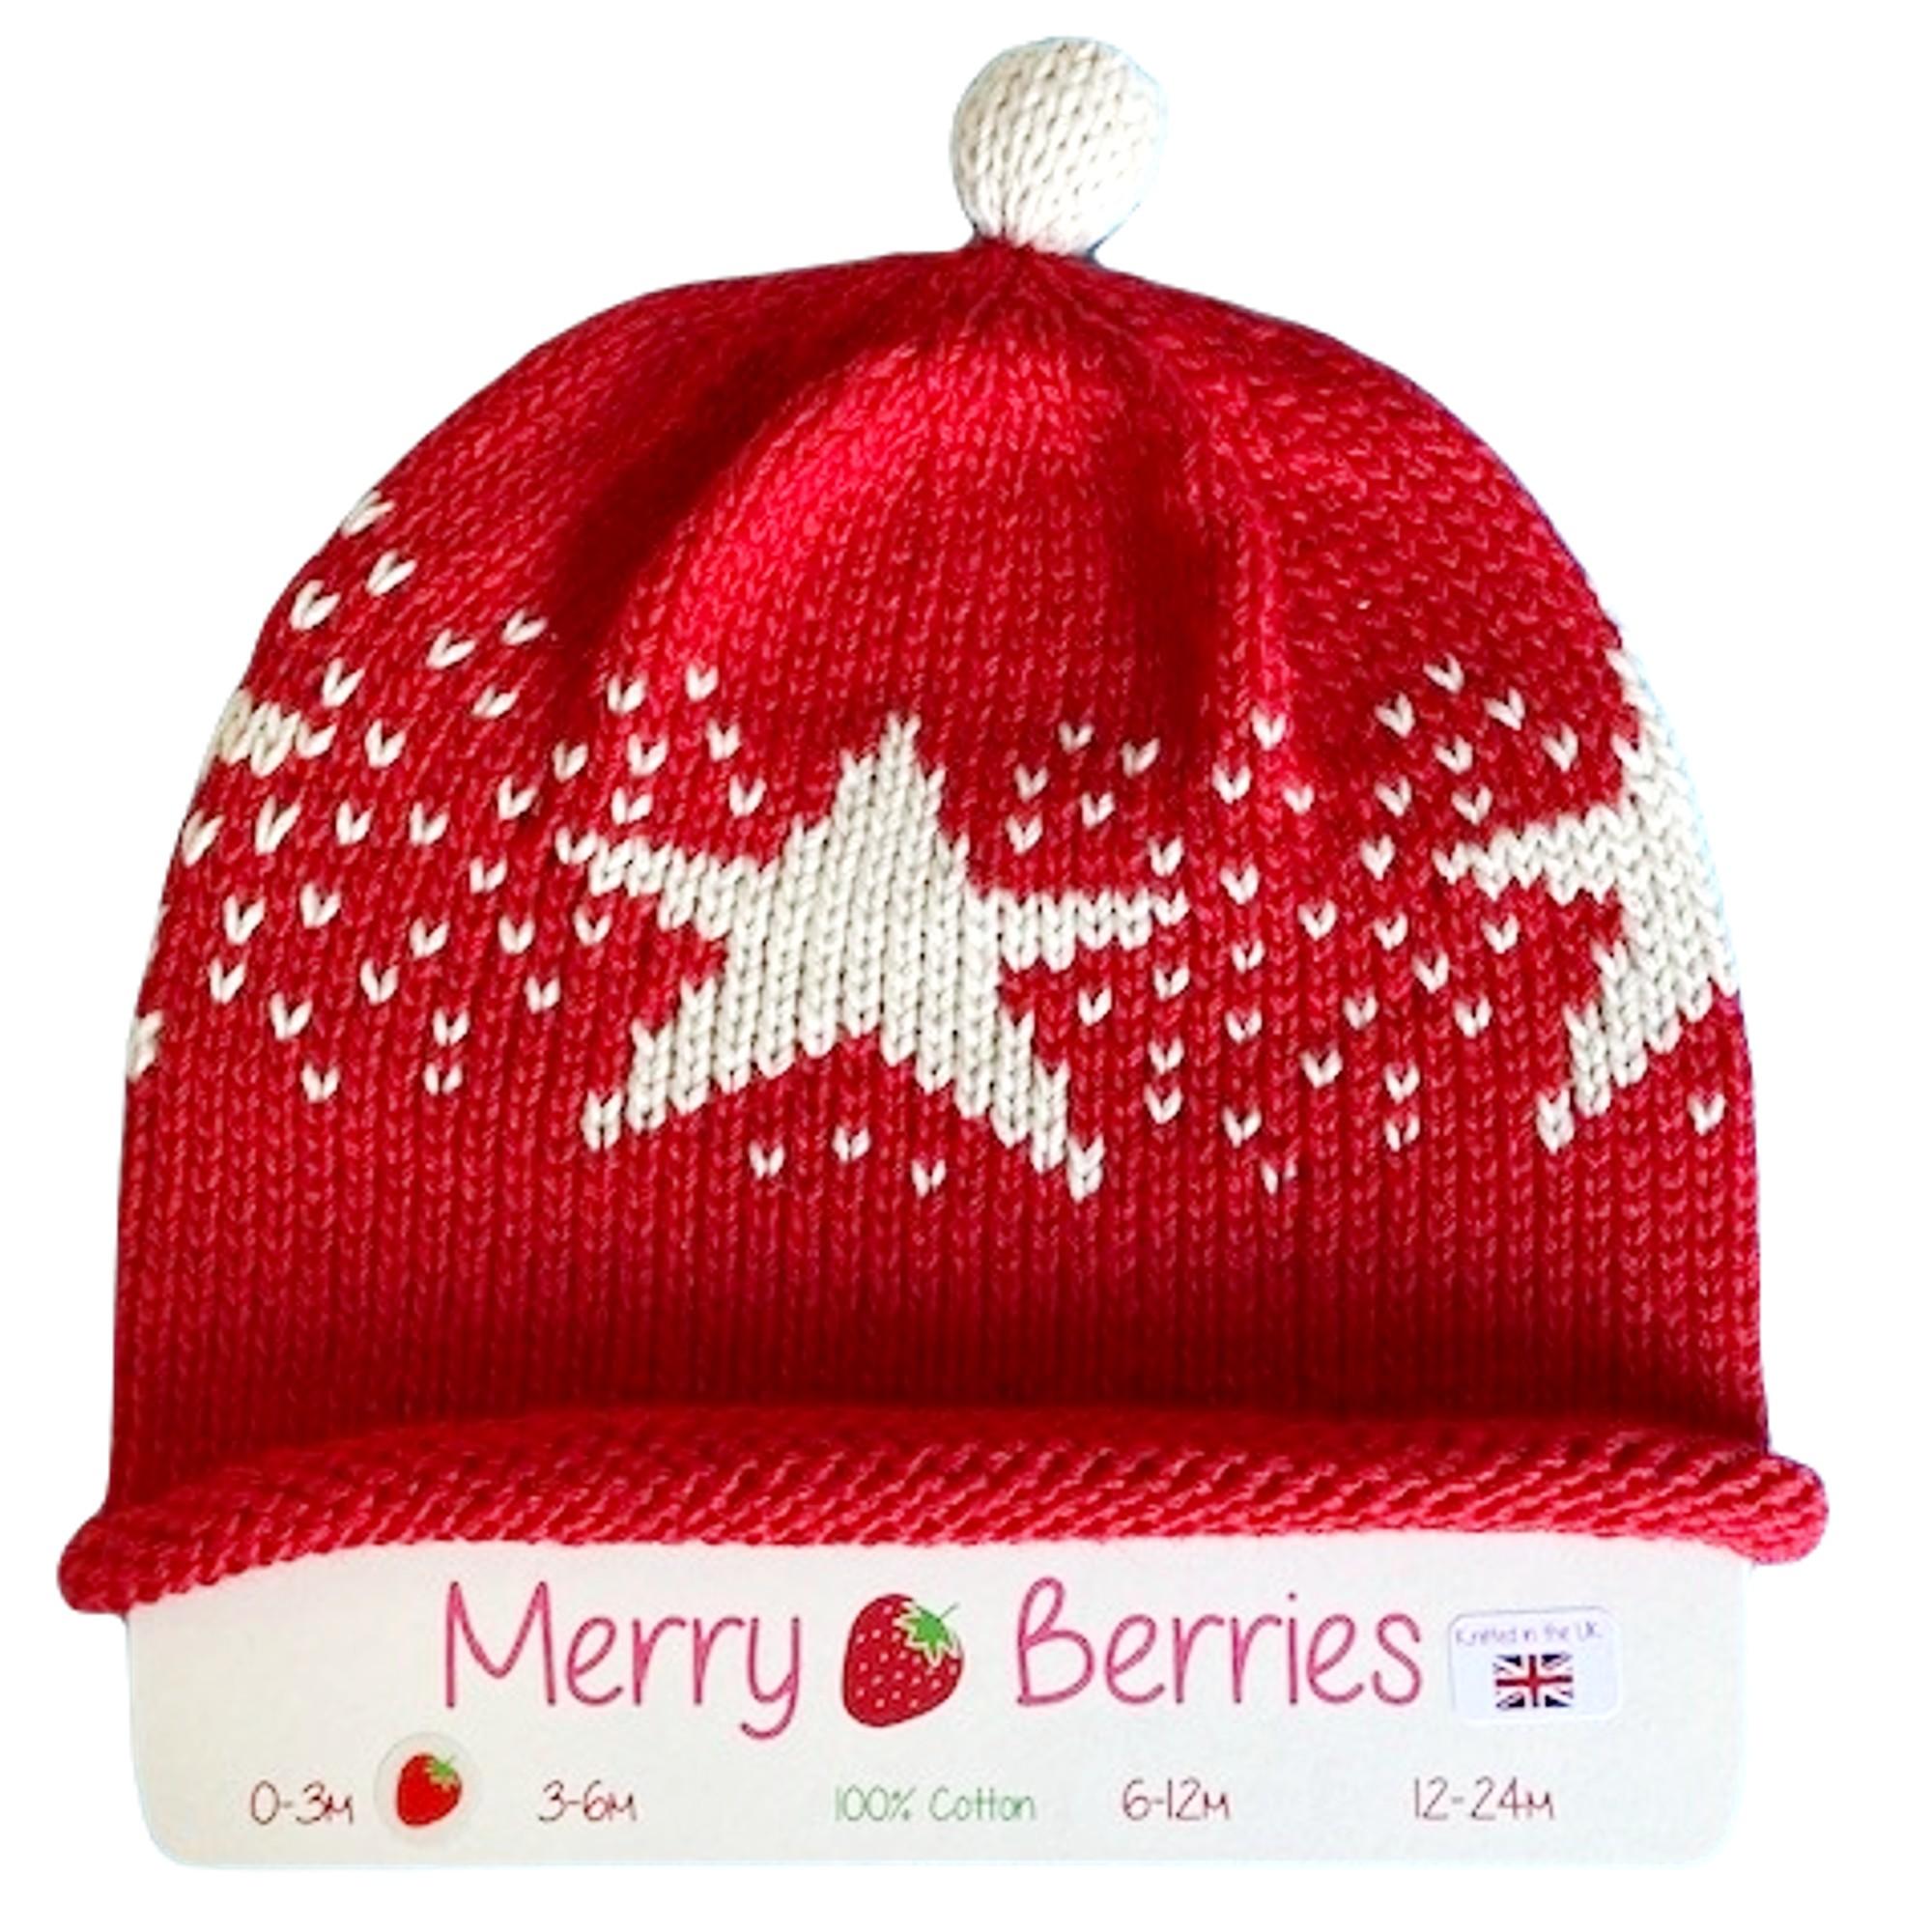 Merry Berries - Red cream Star Knitted baby Hat-0-24mths-Cotton